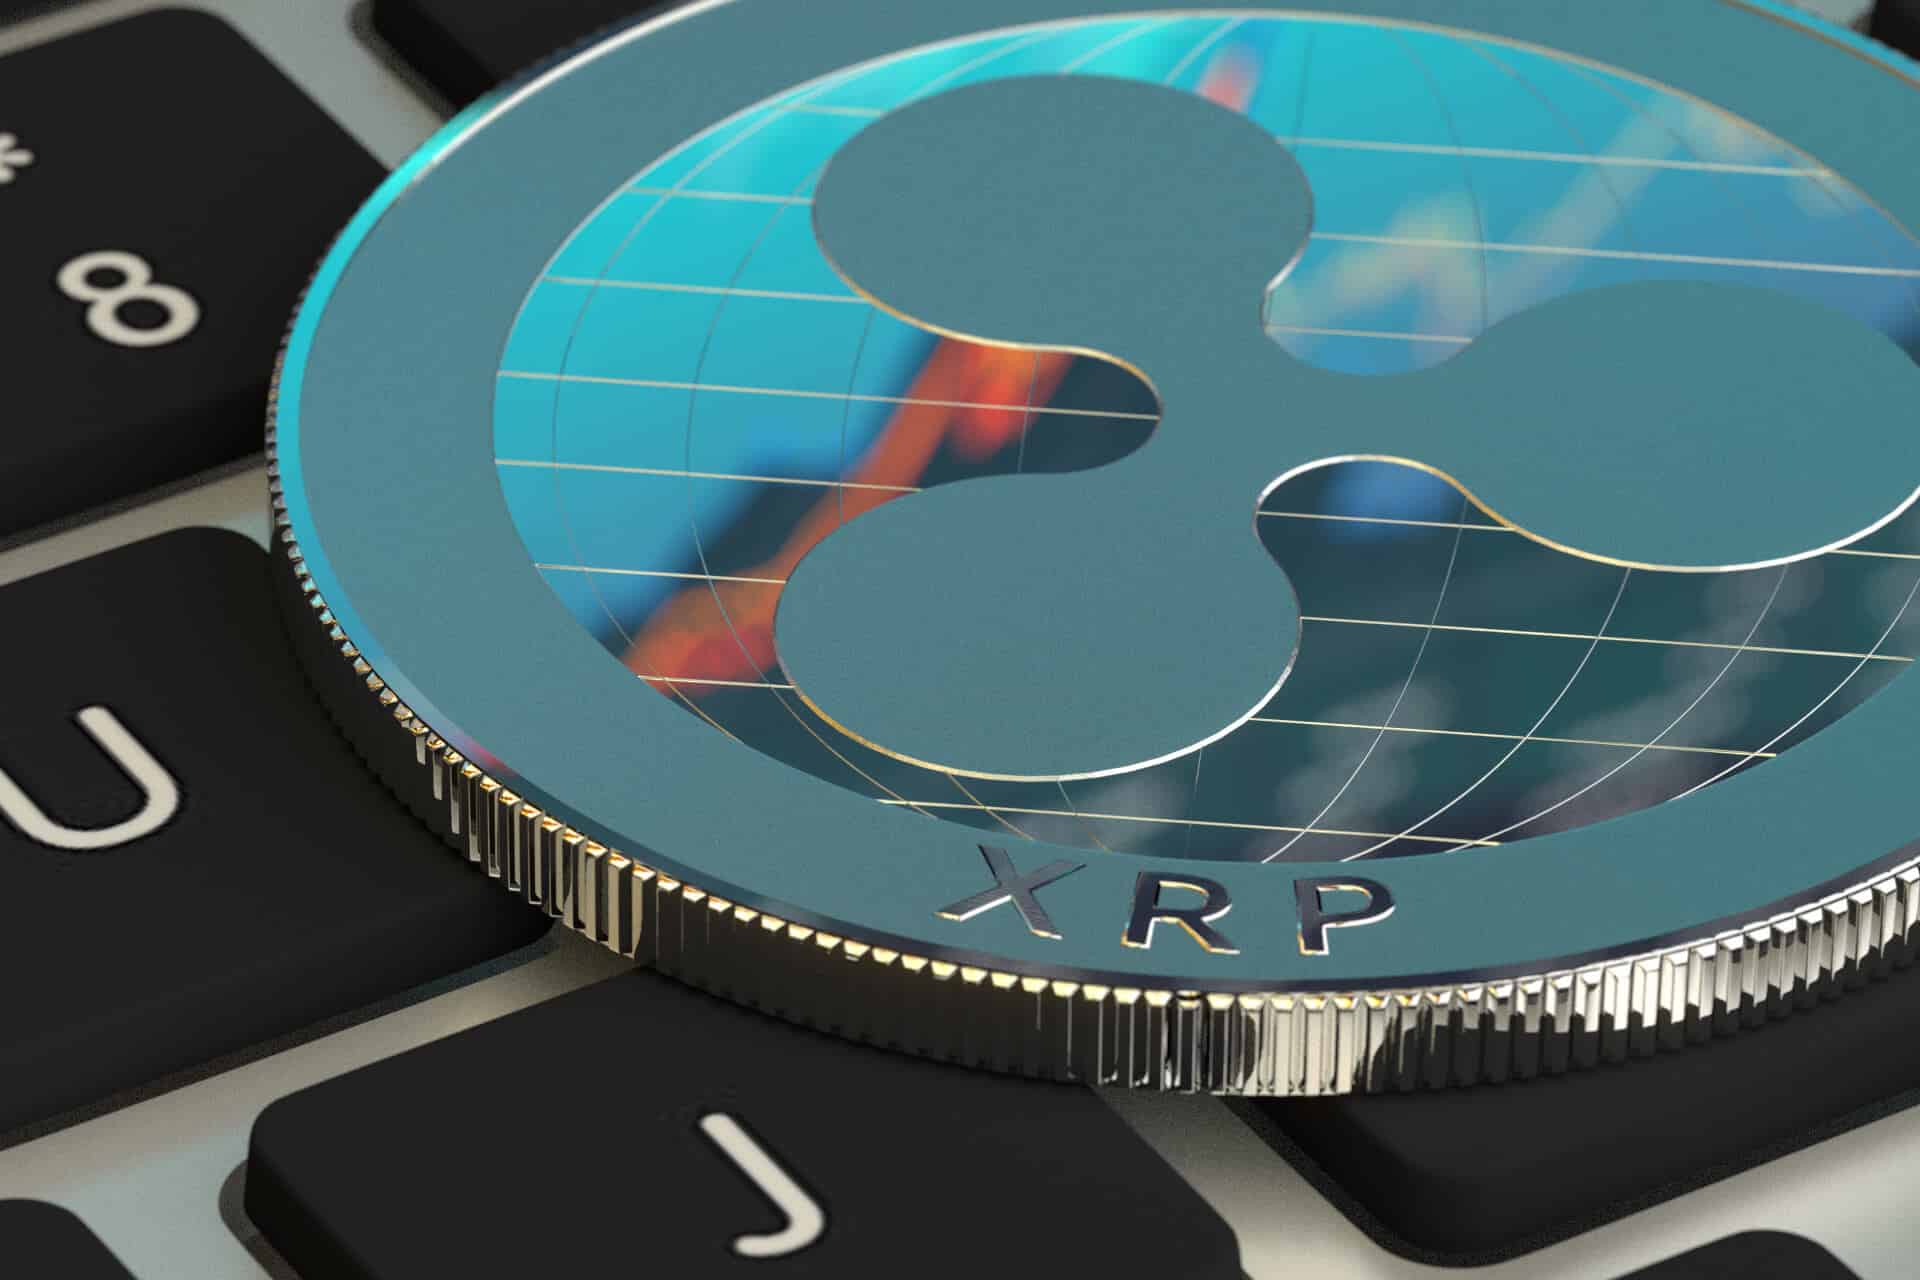 ripple co-founder confirms that his private wallet was hacked